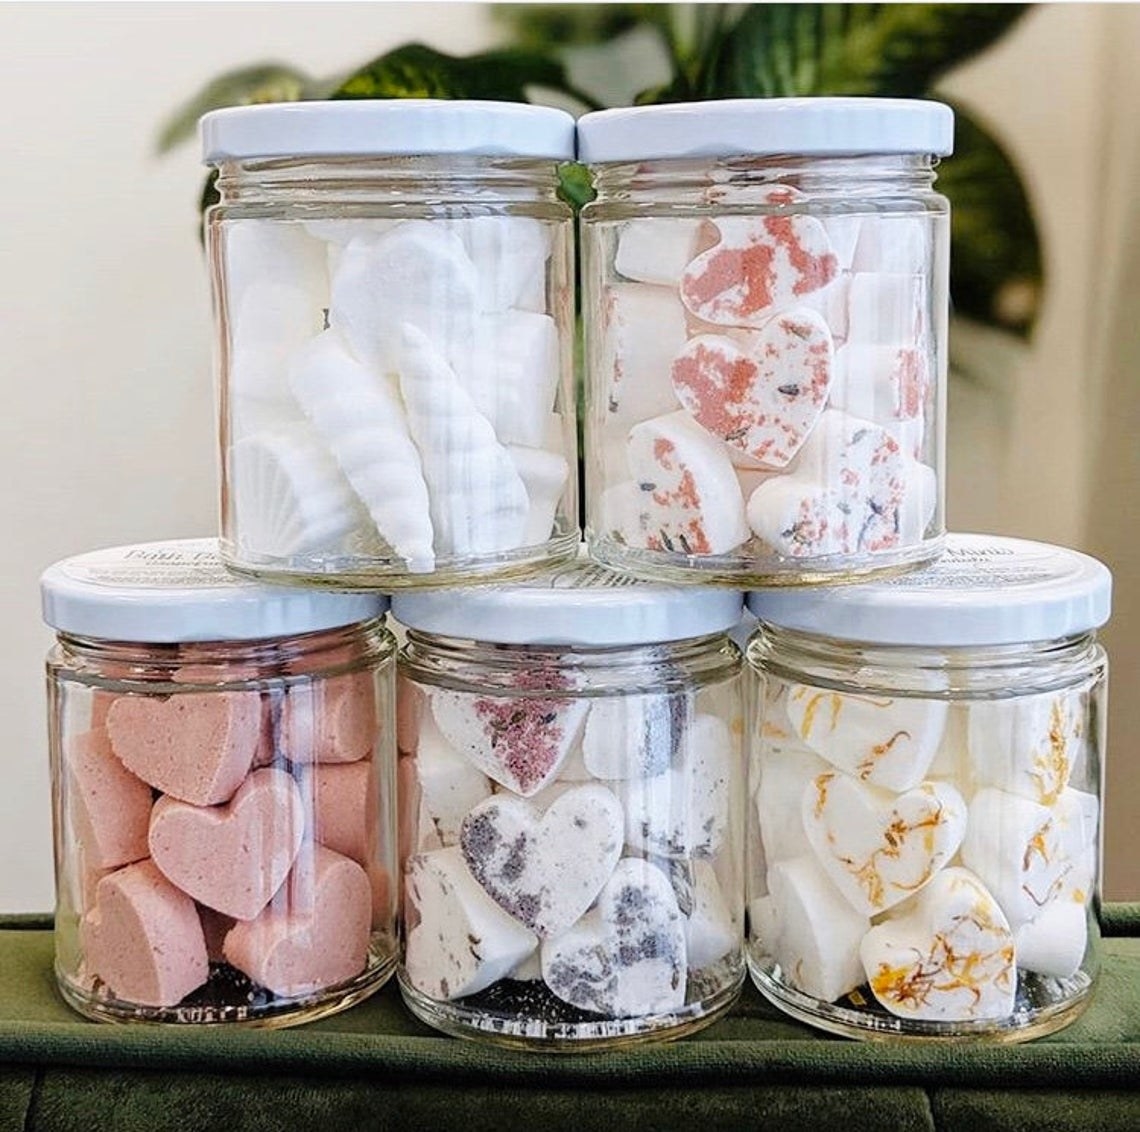 Five glass jars filled with heart-shaped bath bombs